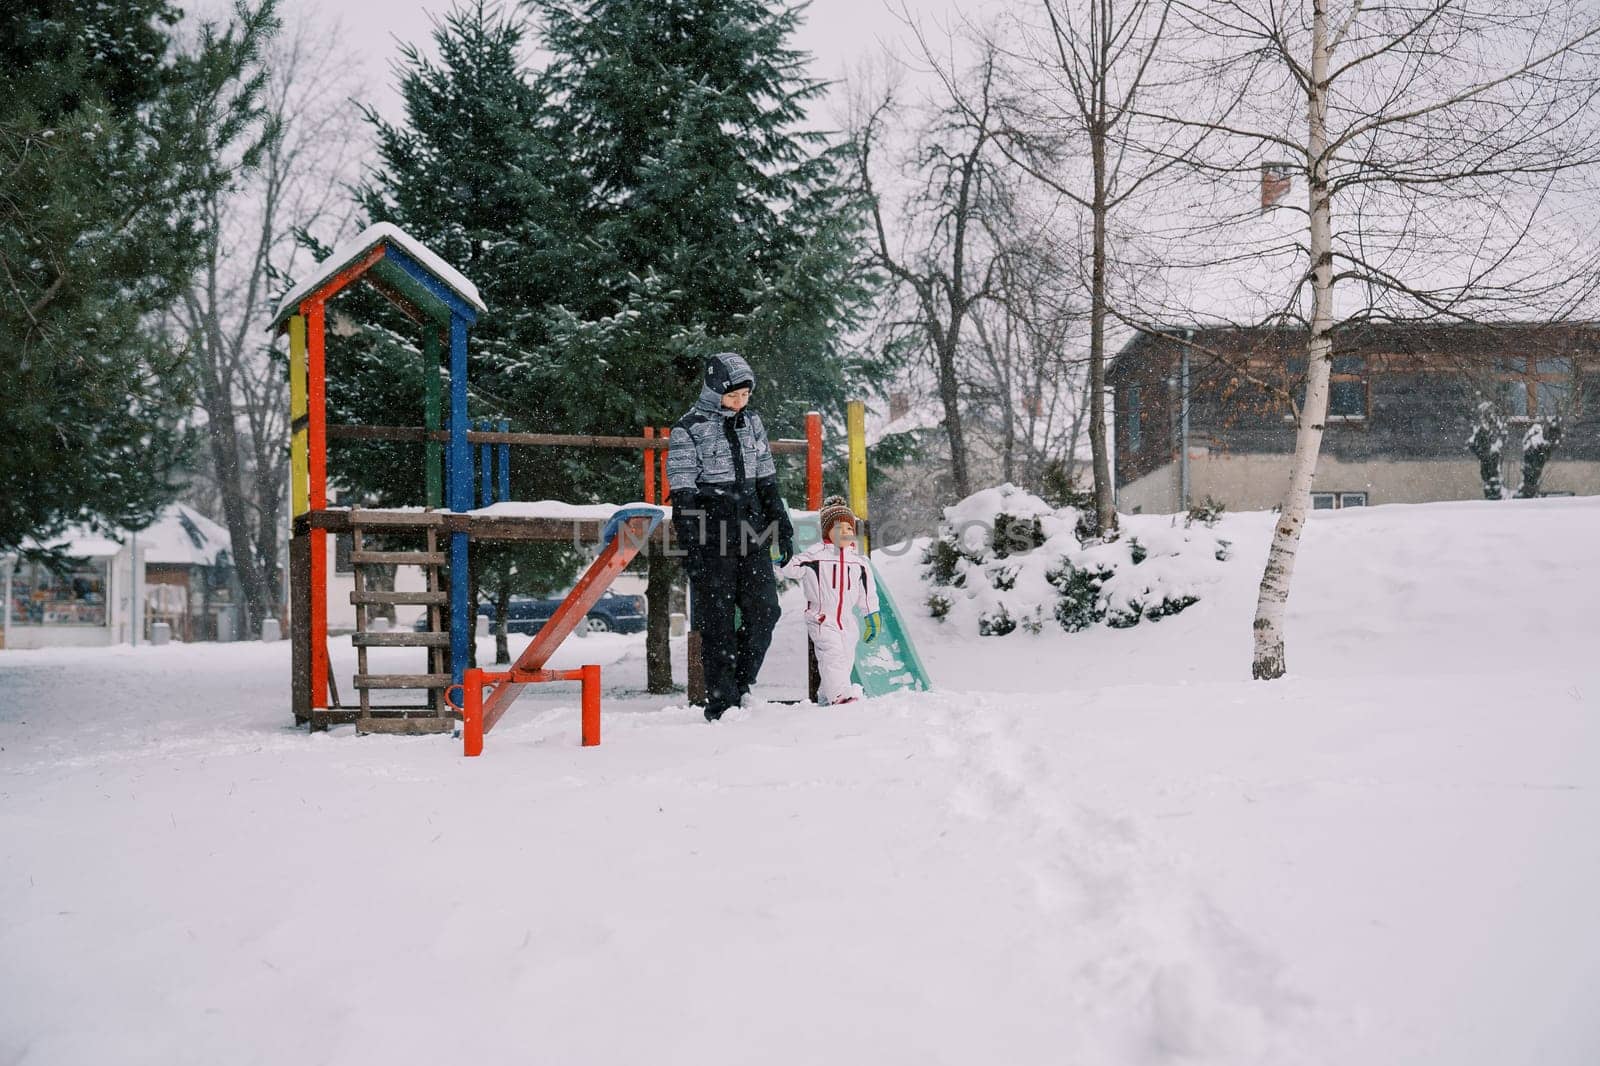 Little girl and her mother walk holding hands from a colorful snow-covered slide through the park under snowfall by Nadtochiy